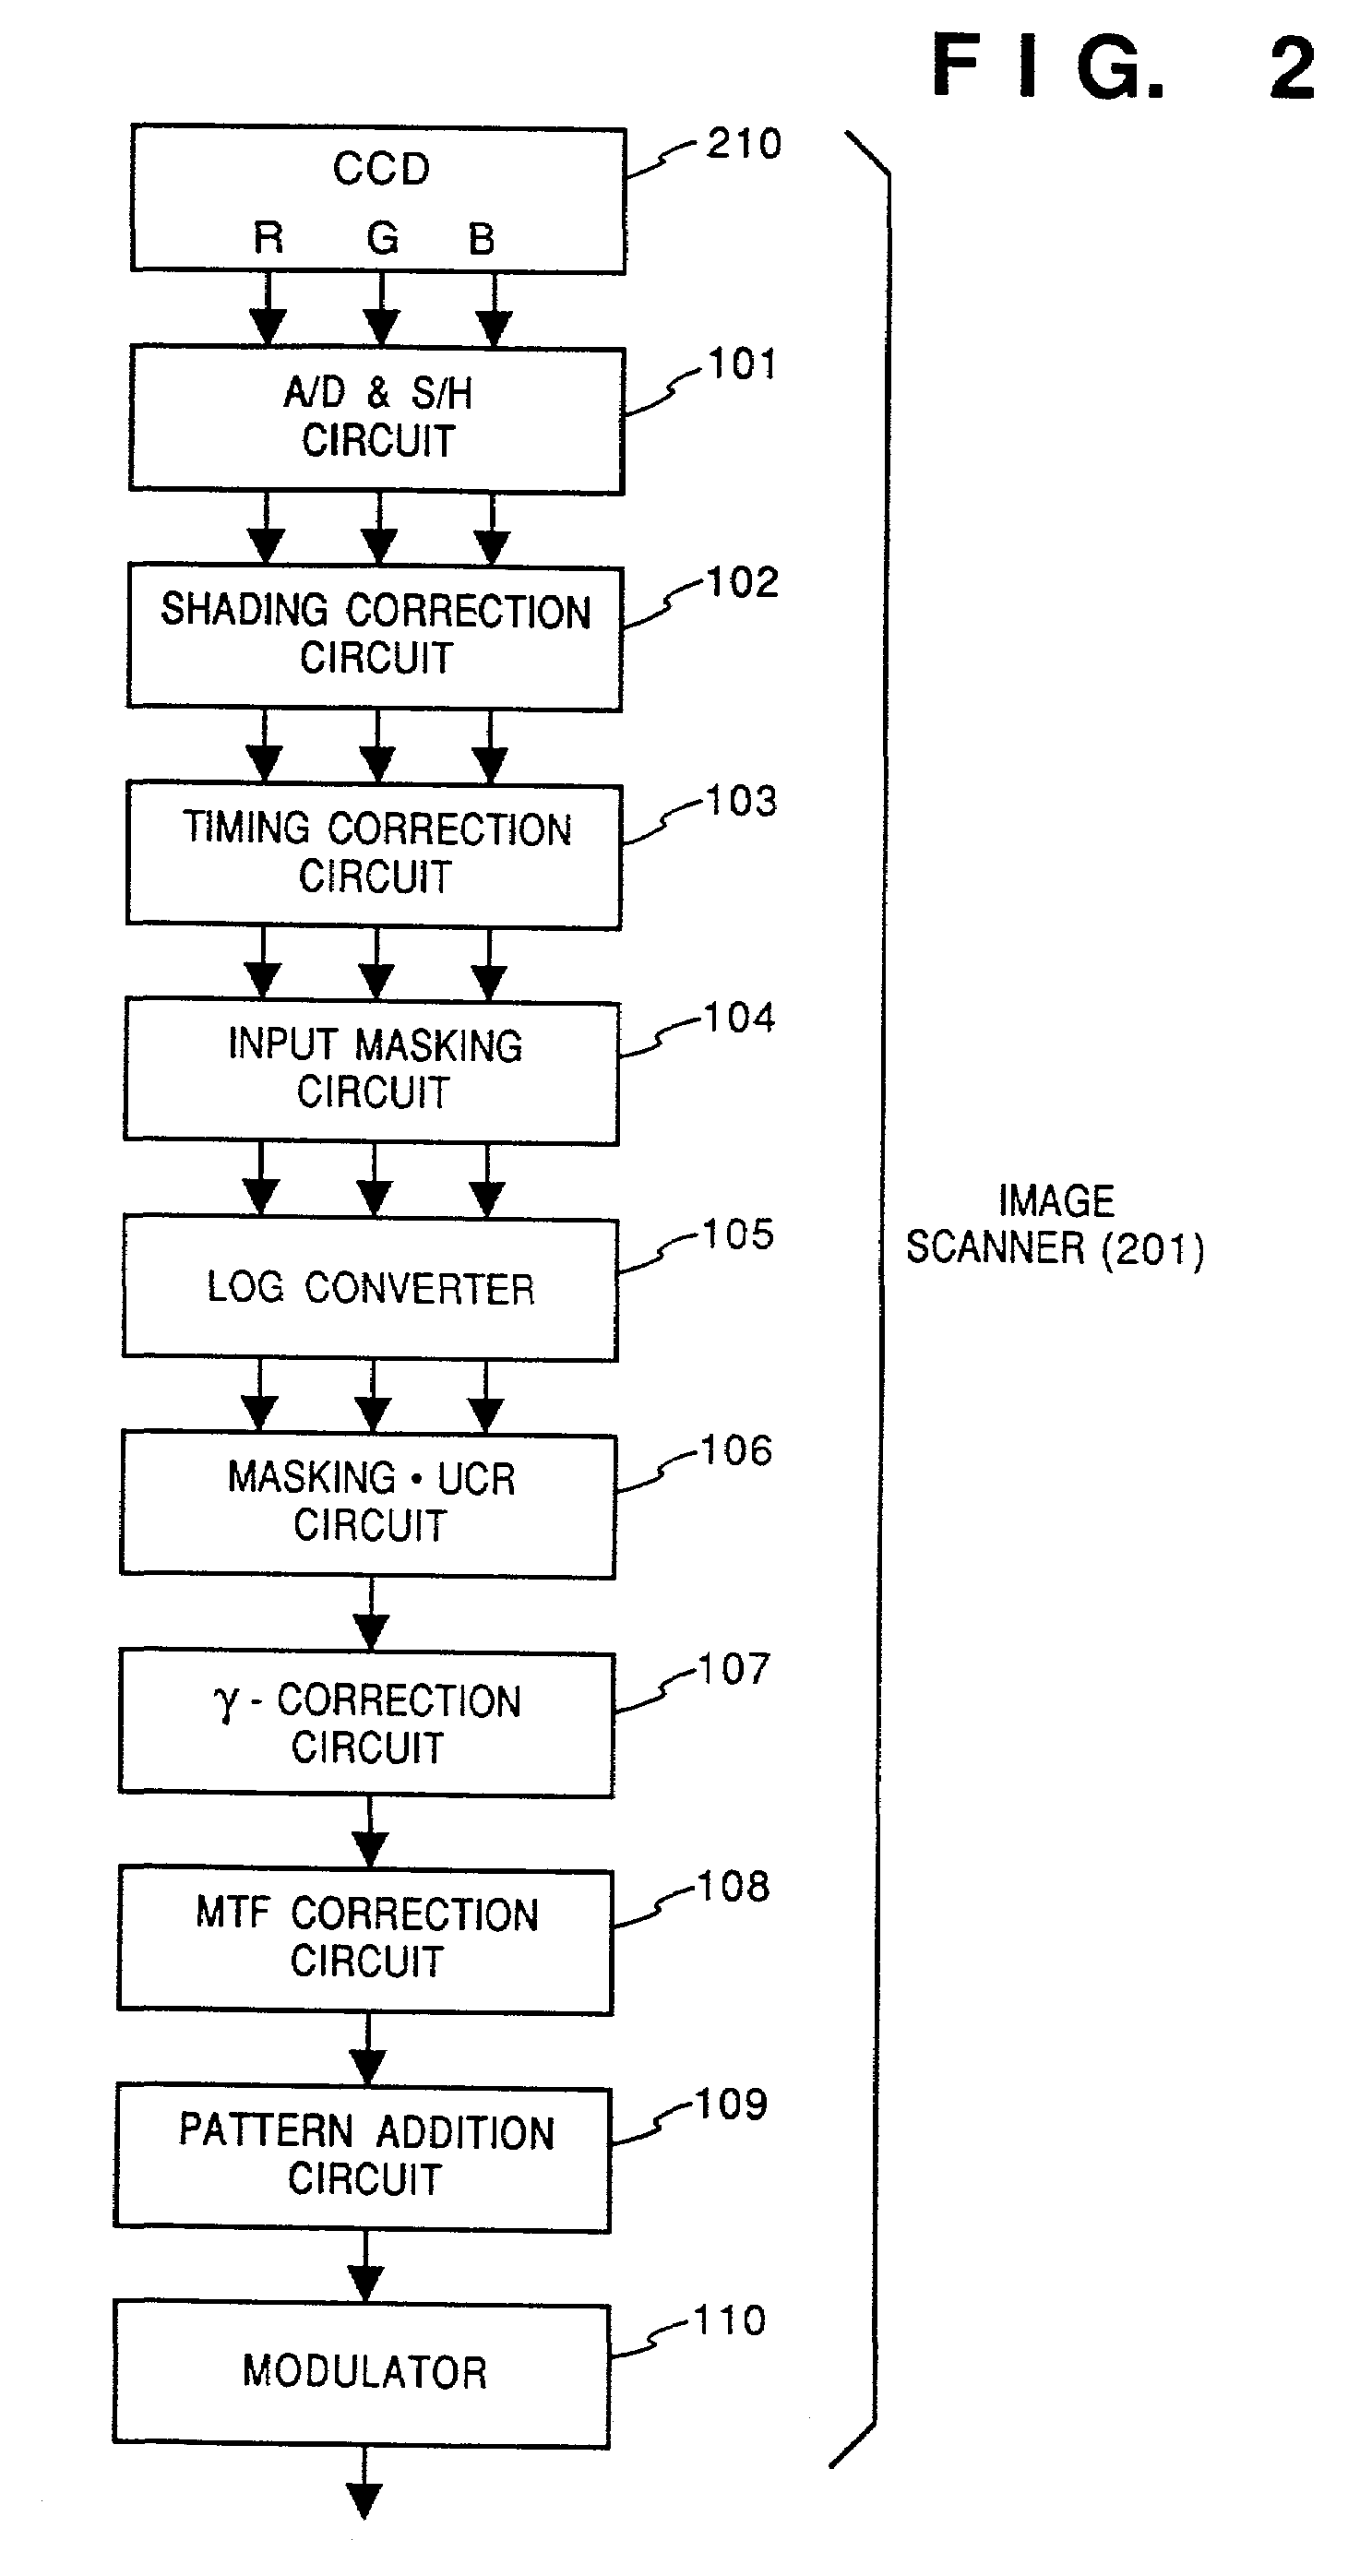 Image processing apparatus and method using image information and additional information or an additional pattern added thereto or superposed thereon